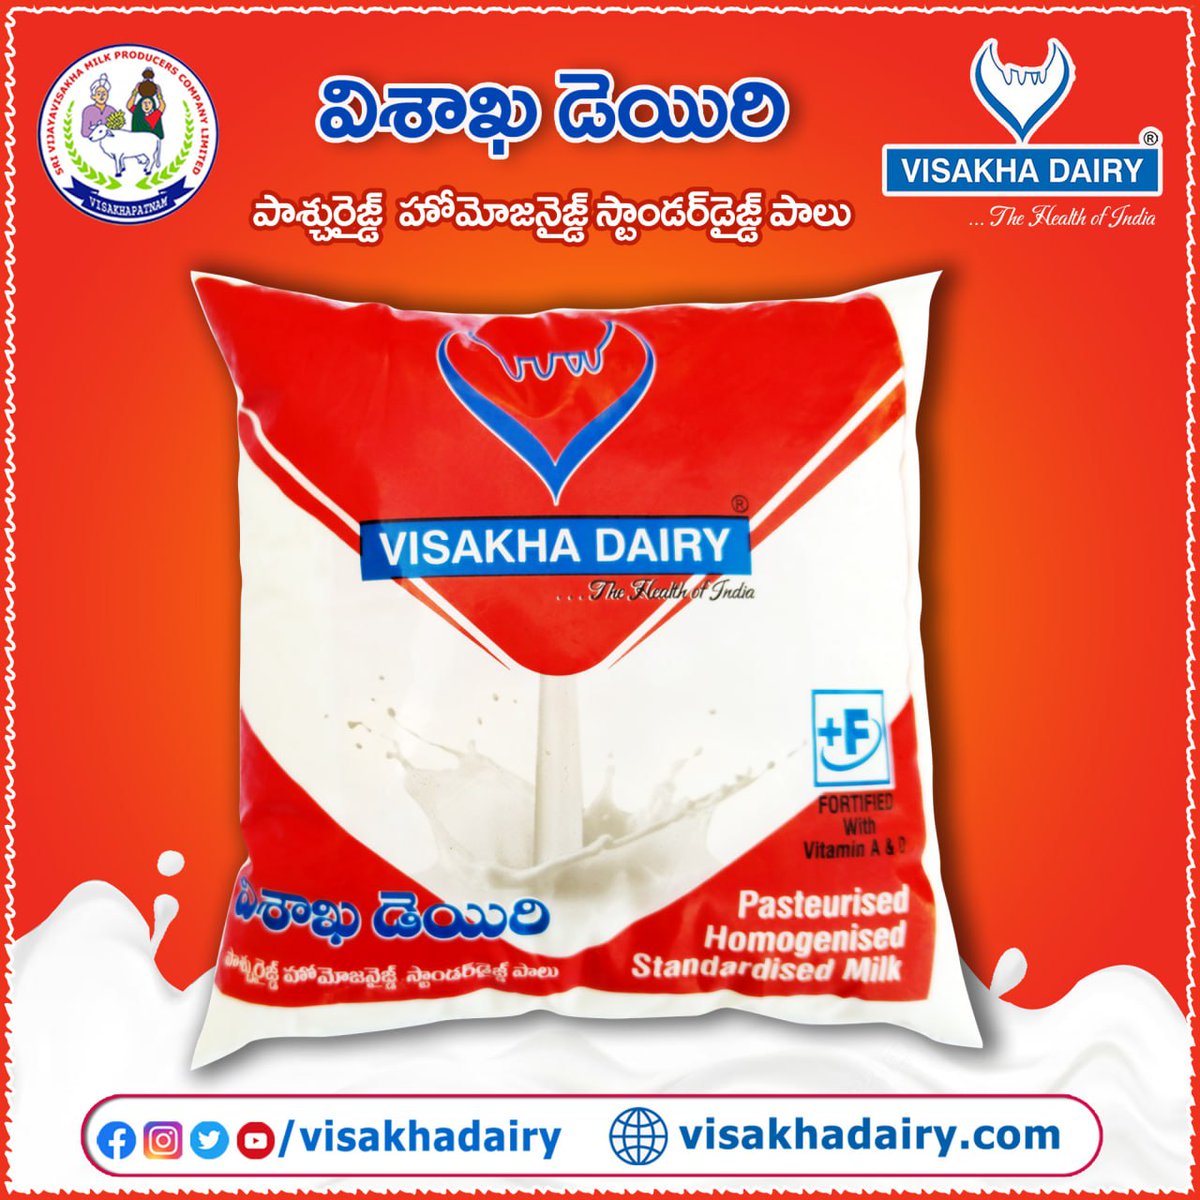 🥛 Experience the goodness of Visakha Dairy Pasteurised Homogenised Standardised Milk! 🐄🥛
Indulge in the rich and wholesome taste of our premium milk, carefully processed to bring you the best in quality and nutrition. 
#VisakhaDairy #FreshMilk #QualityMilk #NutritiousChoice